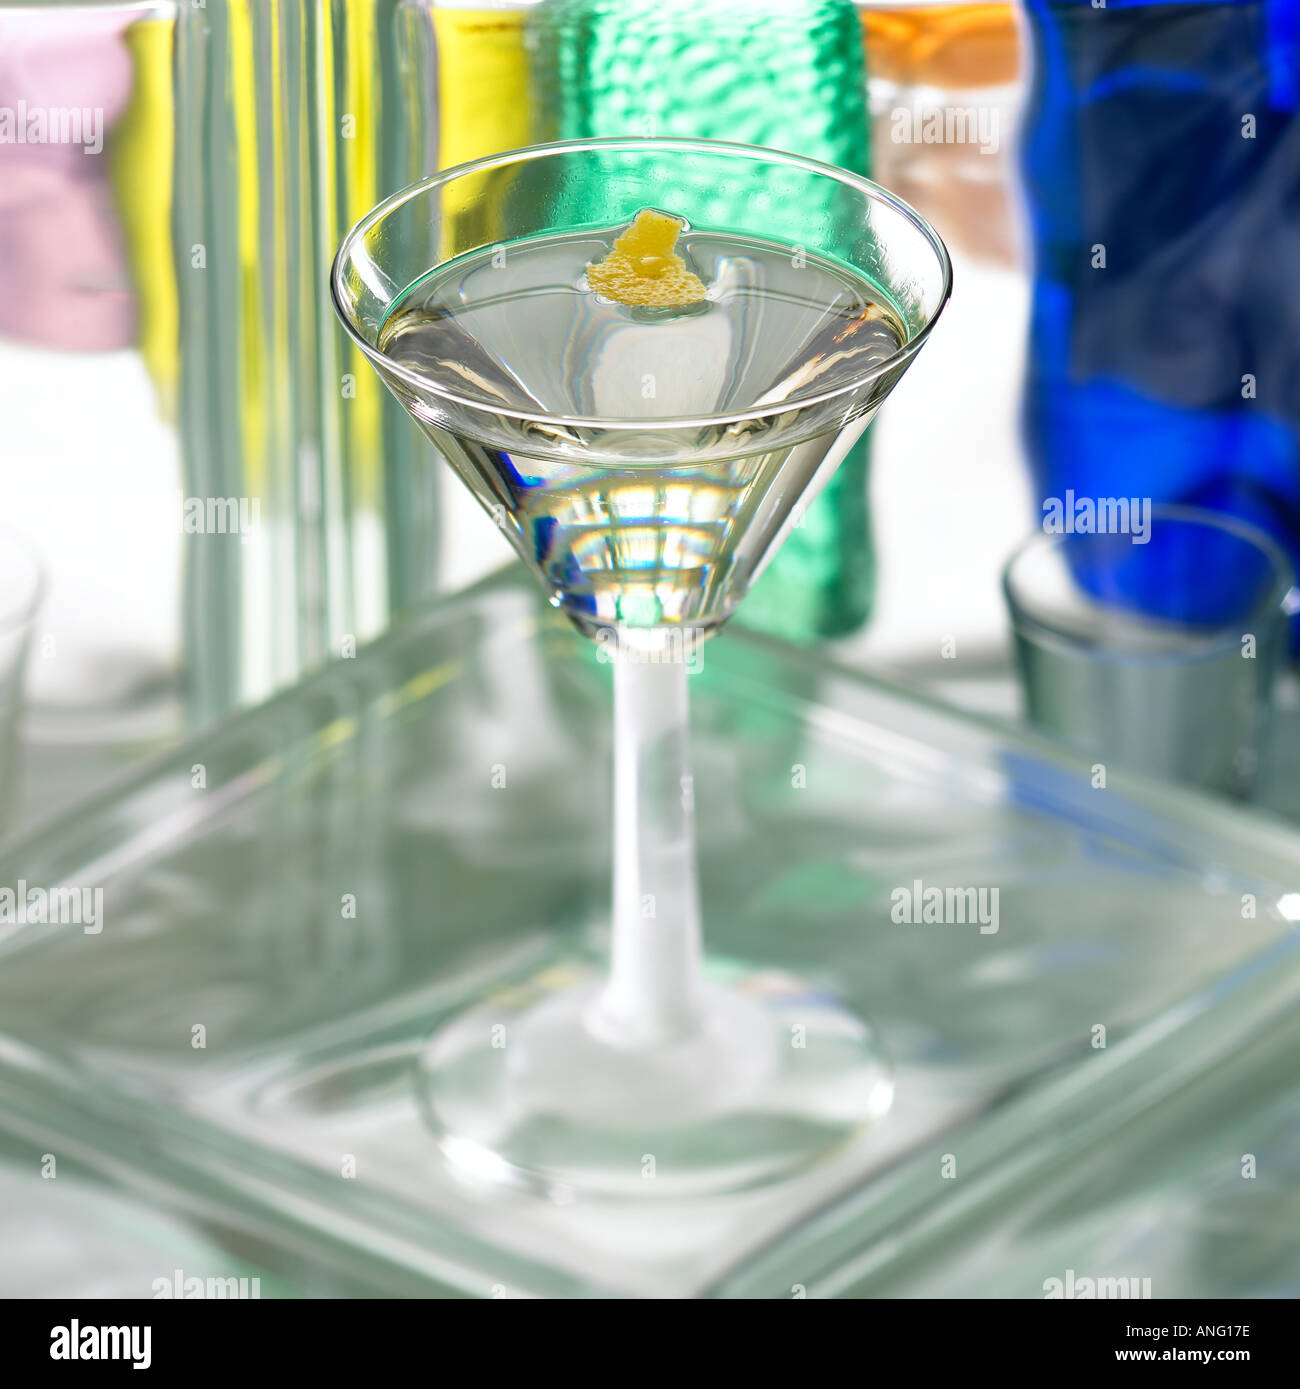 Cocktail Vespers Iced Gin Iced Vodka Dry Vermouth or Lillet lemon peel Keywords drink alcohol cocktails Stock Photo